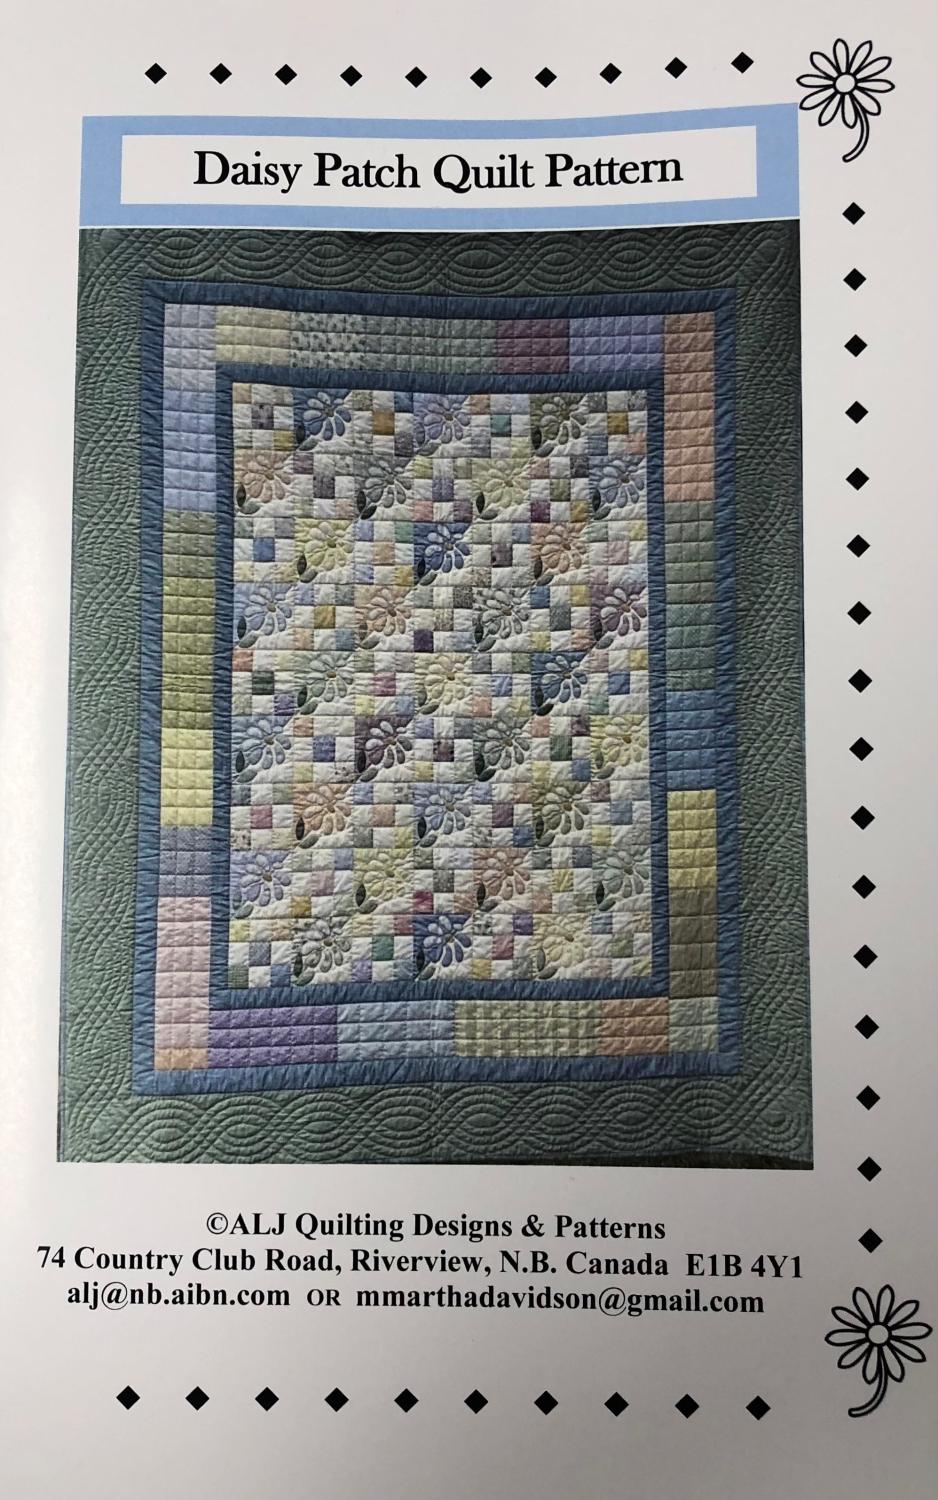 Daisy Patch Quilt Pattern